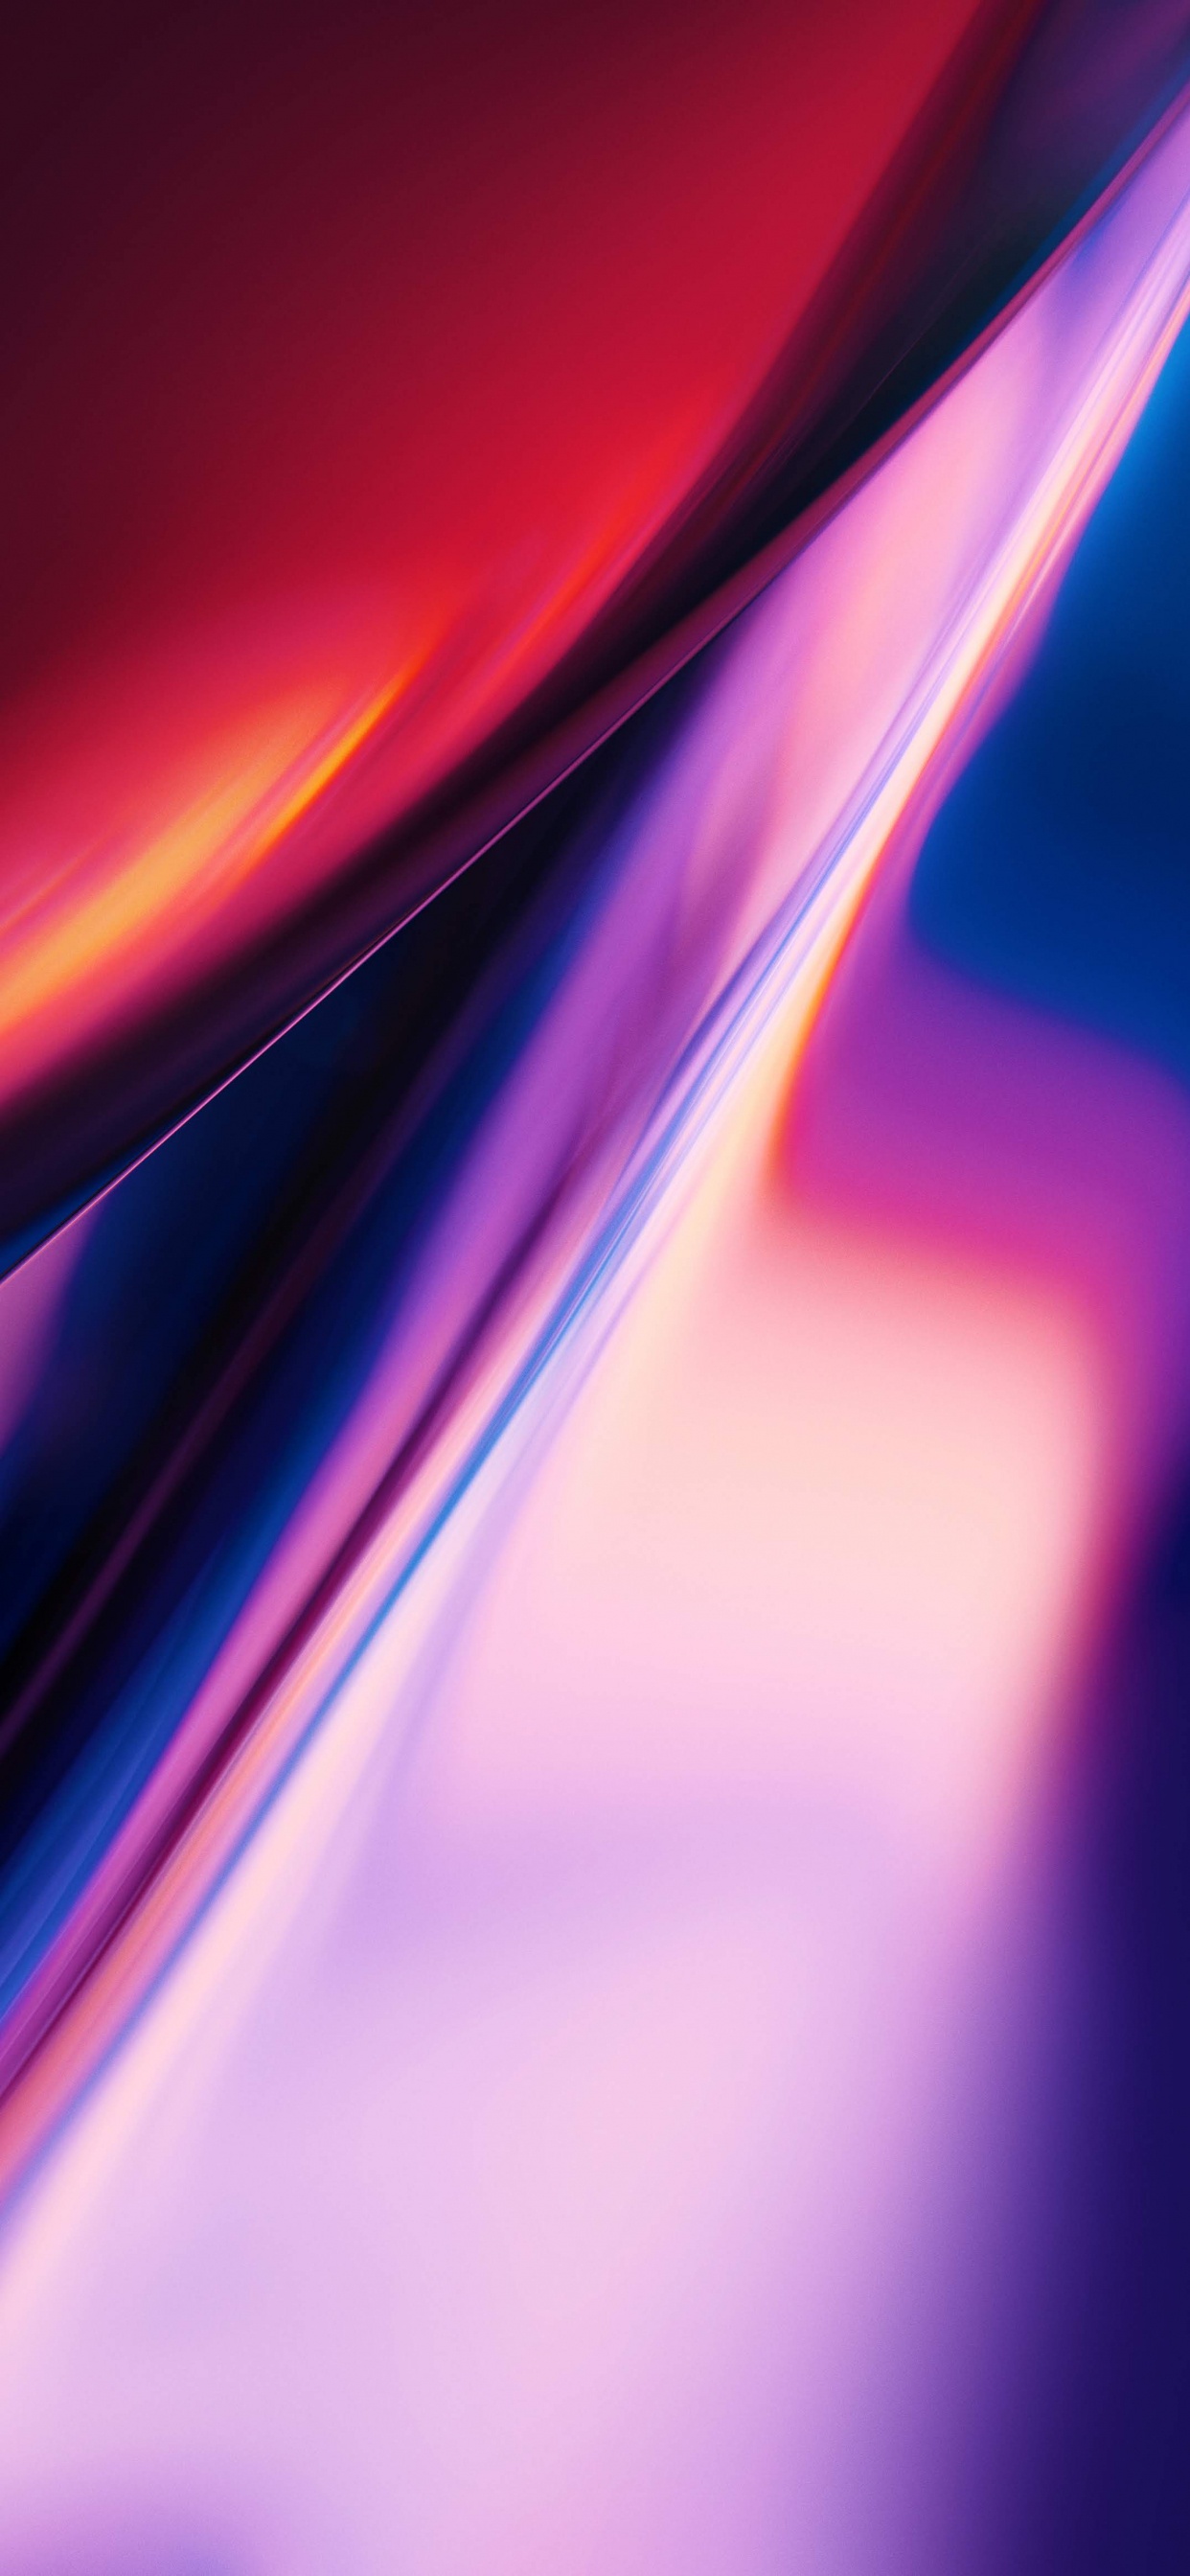 OnePlus 7 Pro, Oneplus 7t, Oneplus 8, Android, Colorfulness. Wallpaper in 1242x2688 Resolution